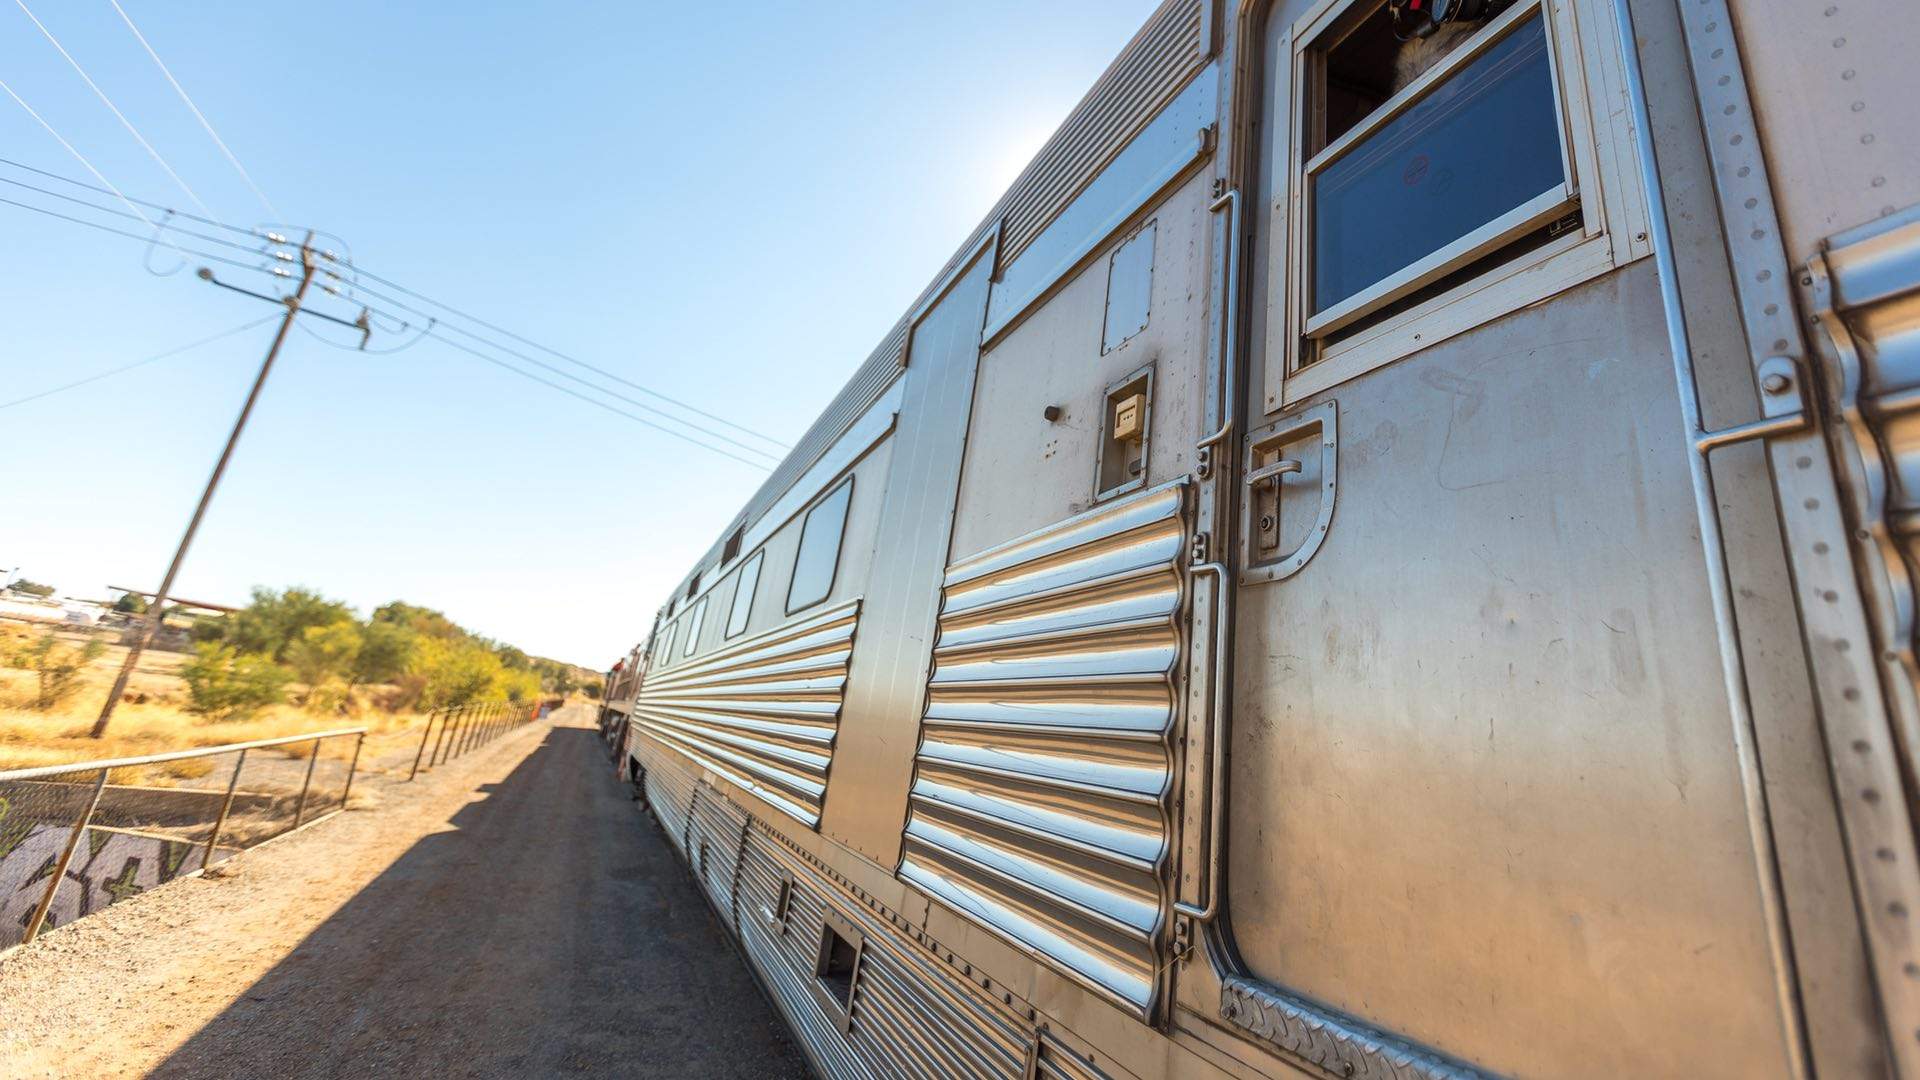 SBS Viceland Is Airing a Very Extended 17-Hour Doco on the Journey of The Ghan